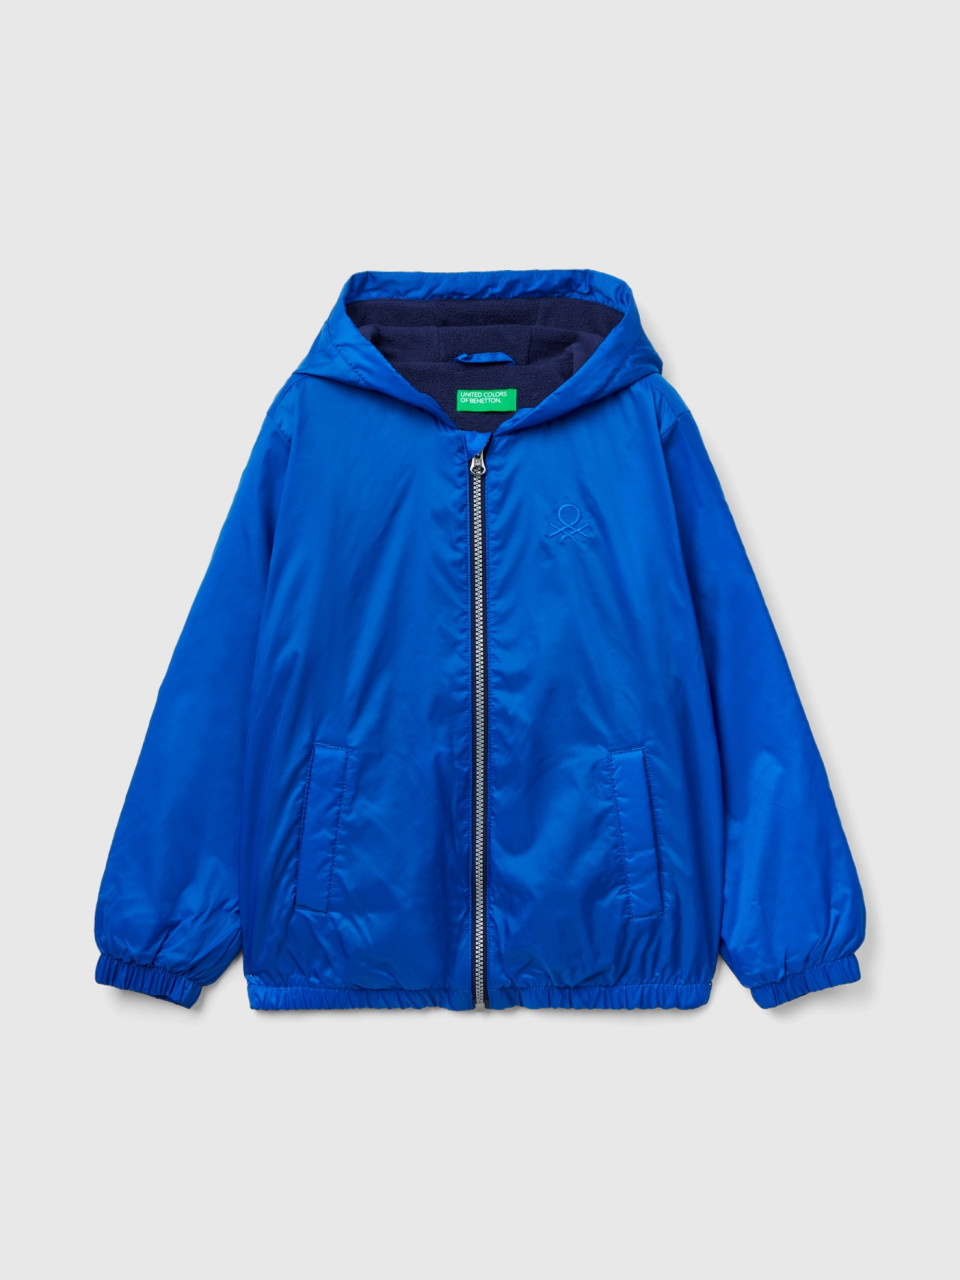 Benetton, Nylon Jacket With Zip And Hood, Bright Blue, Kids